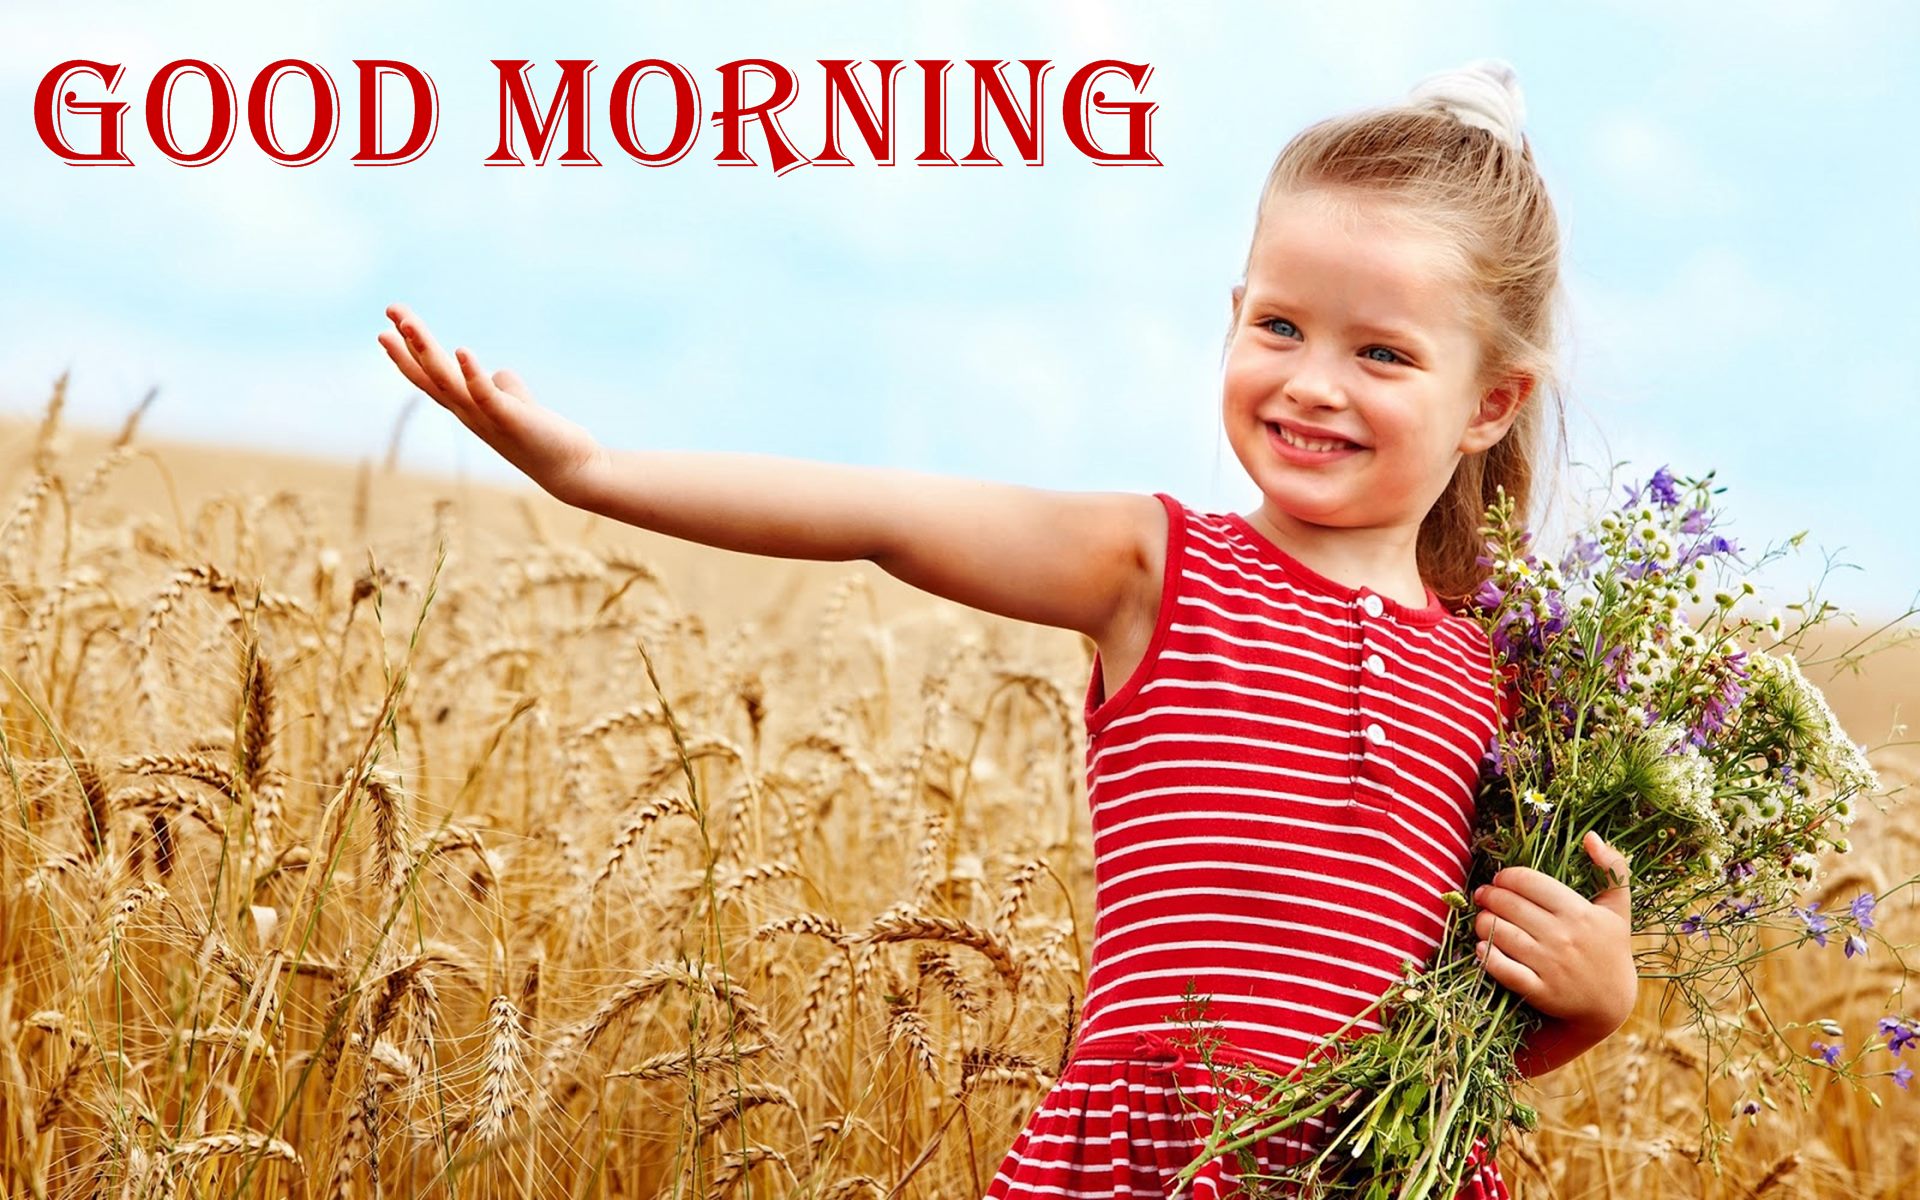 Good Morning Wishes With Baby Pictures, Images - Page 21